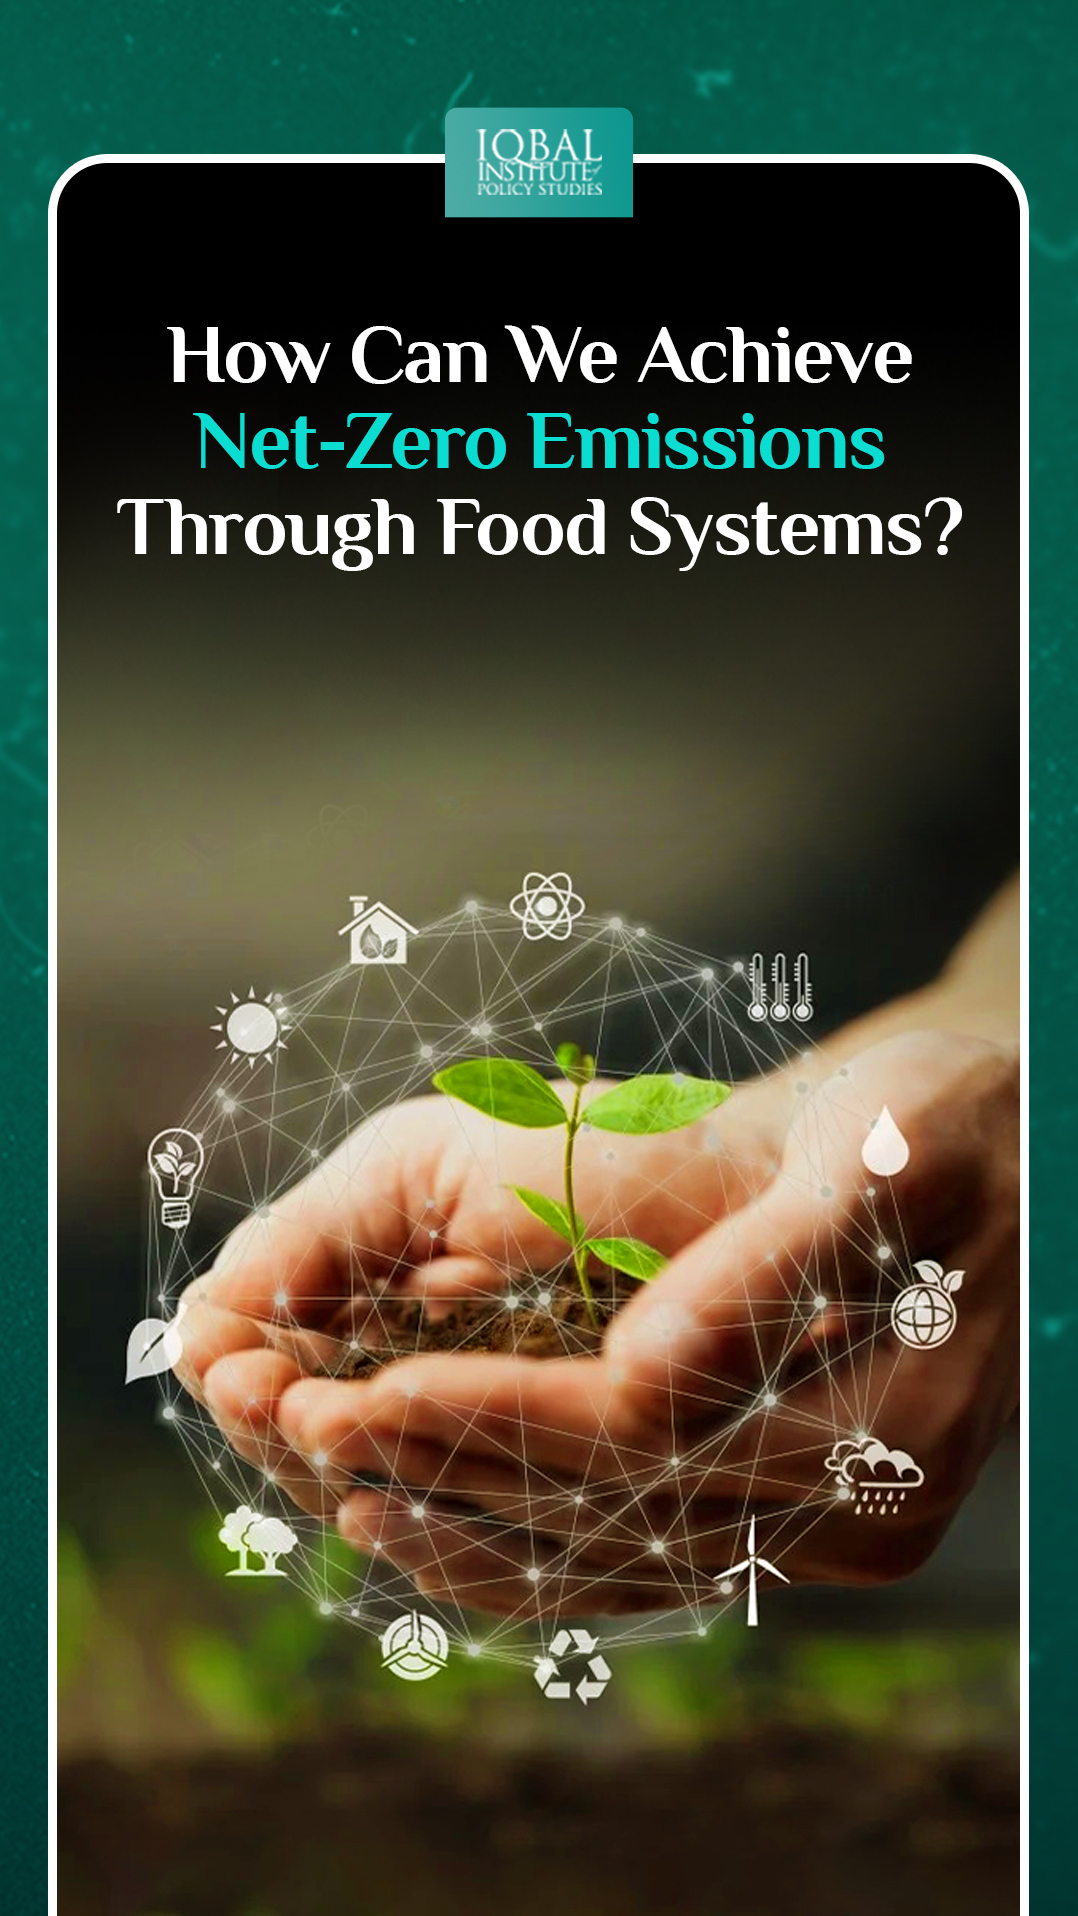 How Can We Achieve Net-Zero Through Food Systems?